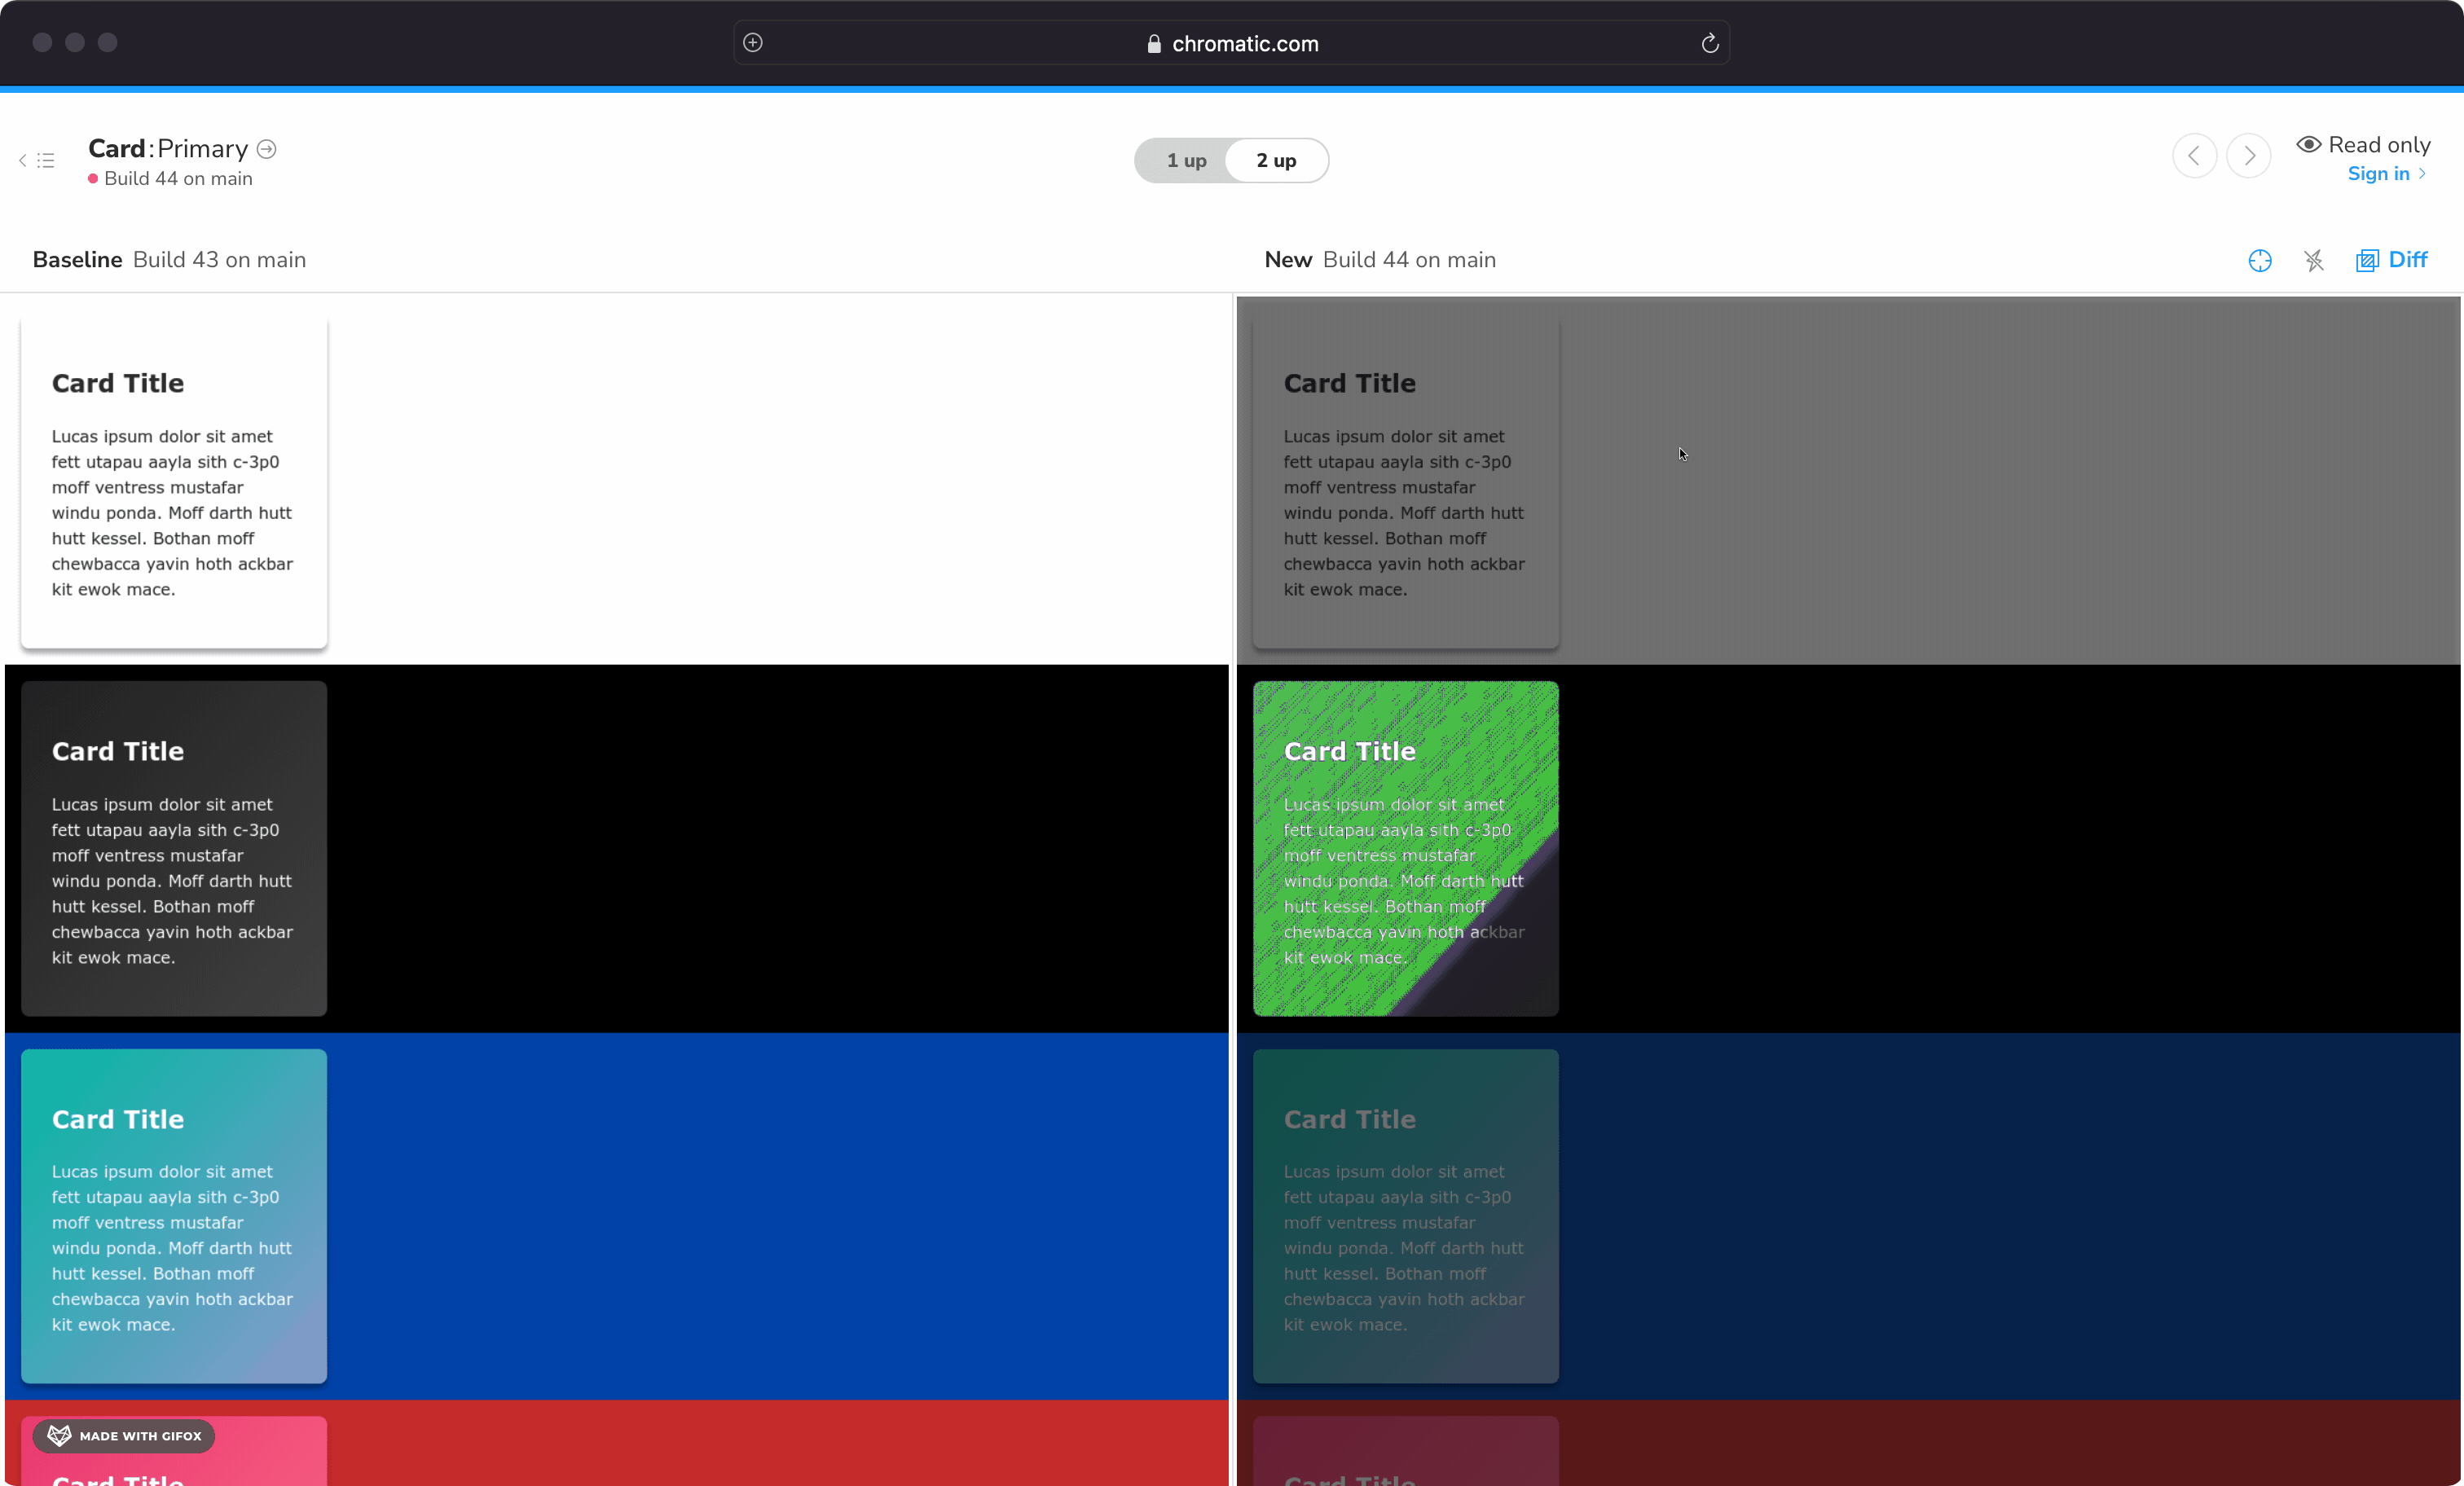 Change in dark theme picked up by Chromatic